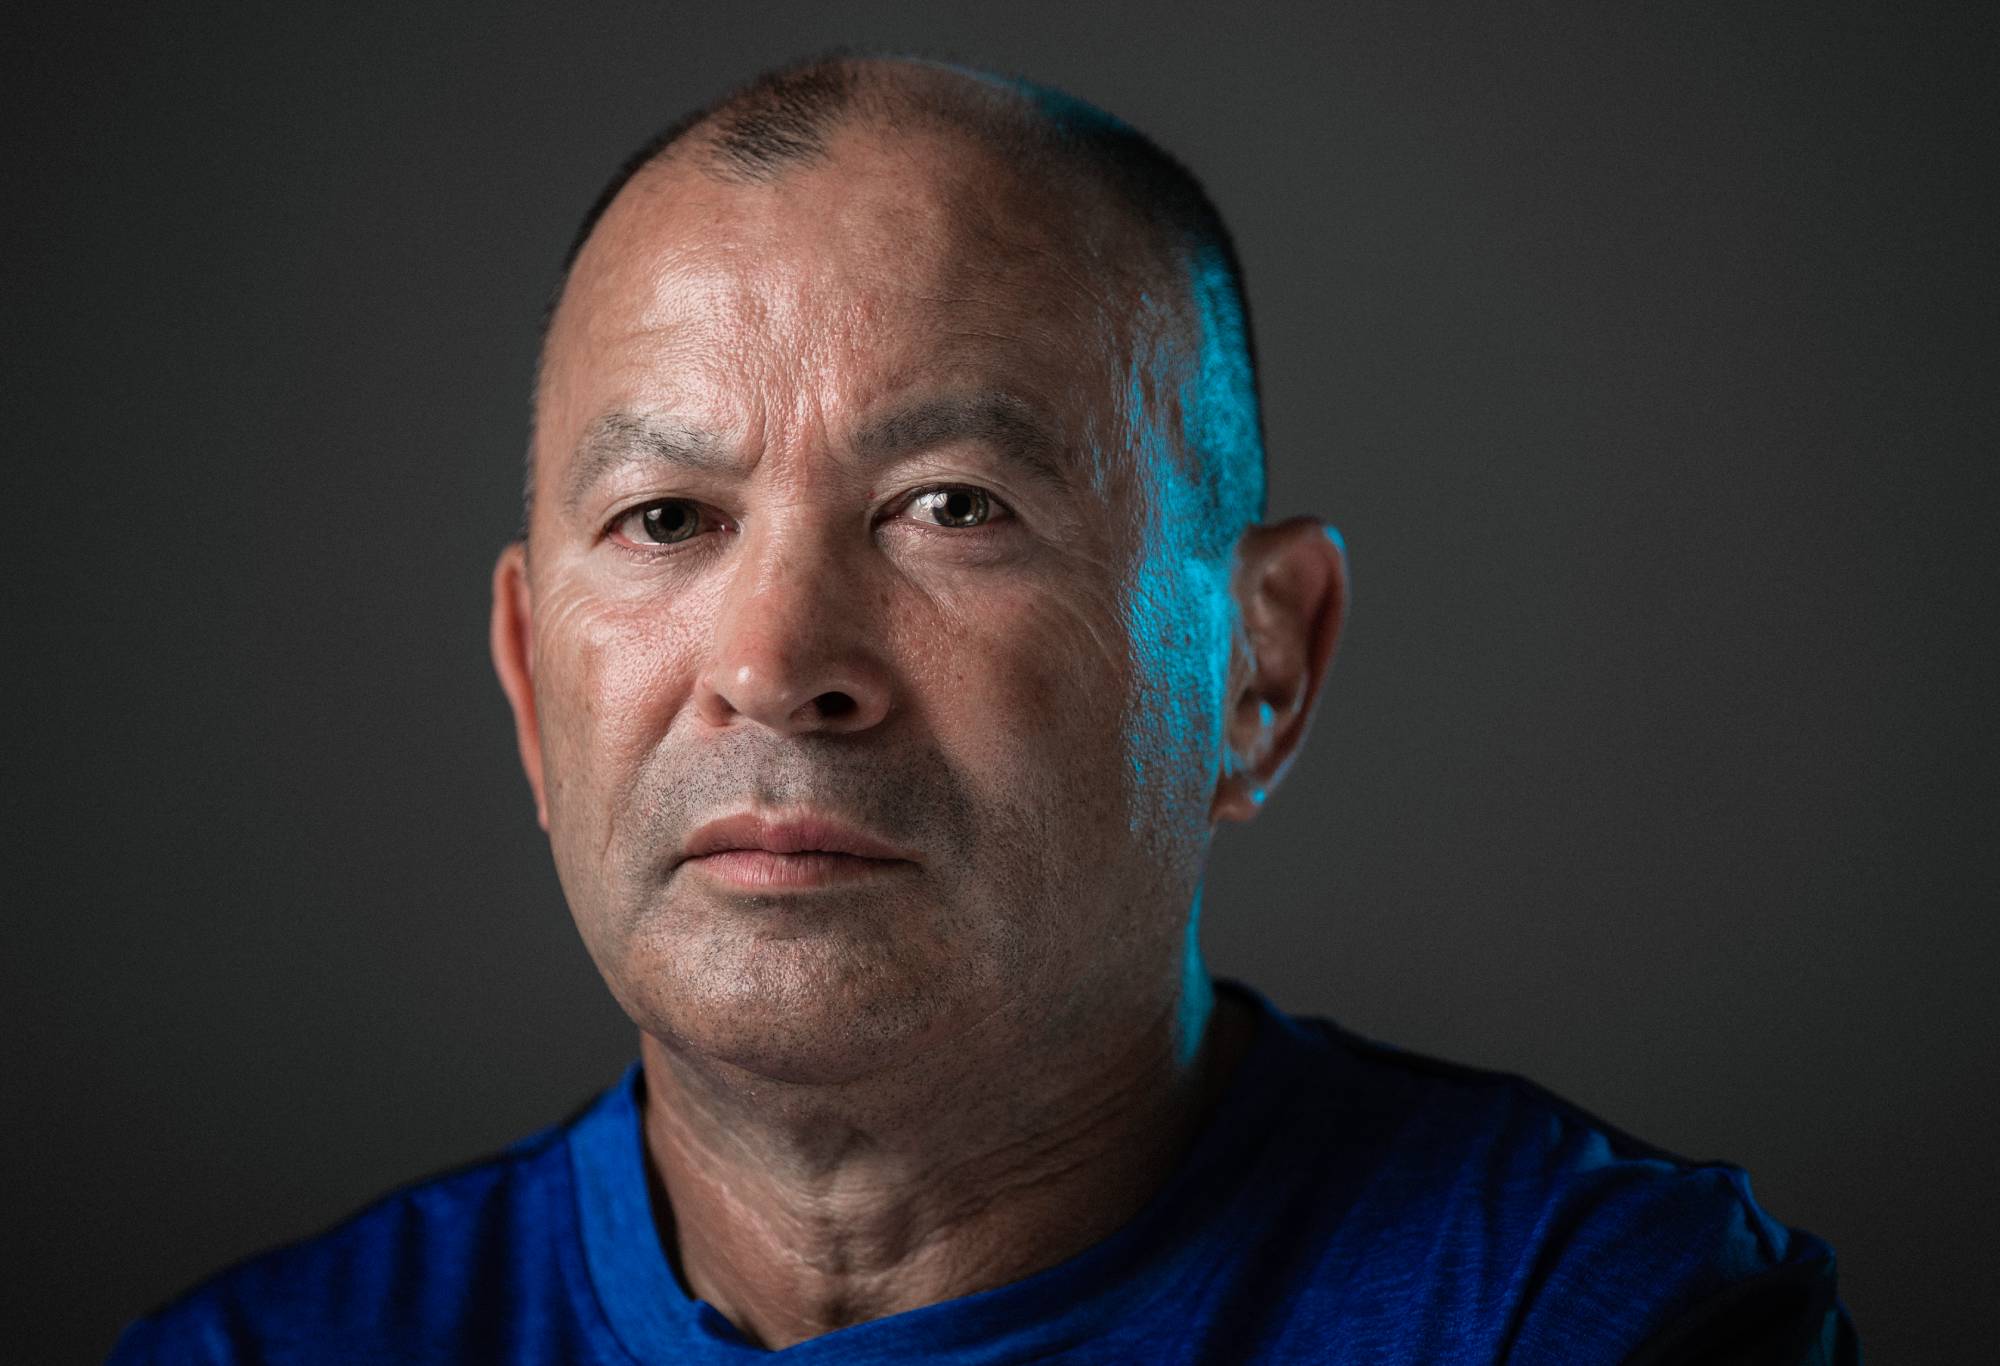 Eddie Jones, Head coach of England poses for a portrait during the England Rugby World Cup 2019 squad photo call on September 15, 2019 in Miyazaki, Japan. (Photo by Michael Regan - World Rugby/World Rugby via Getty Images)